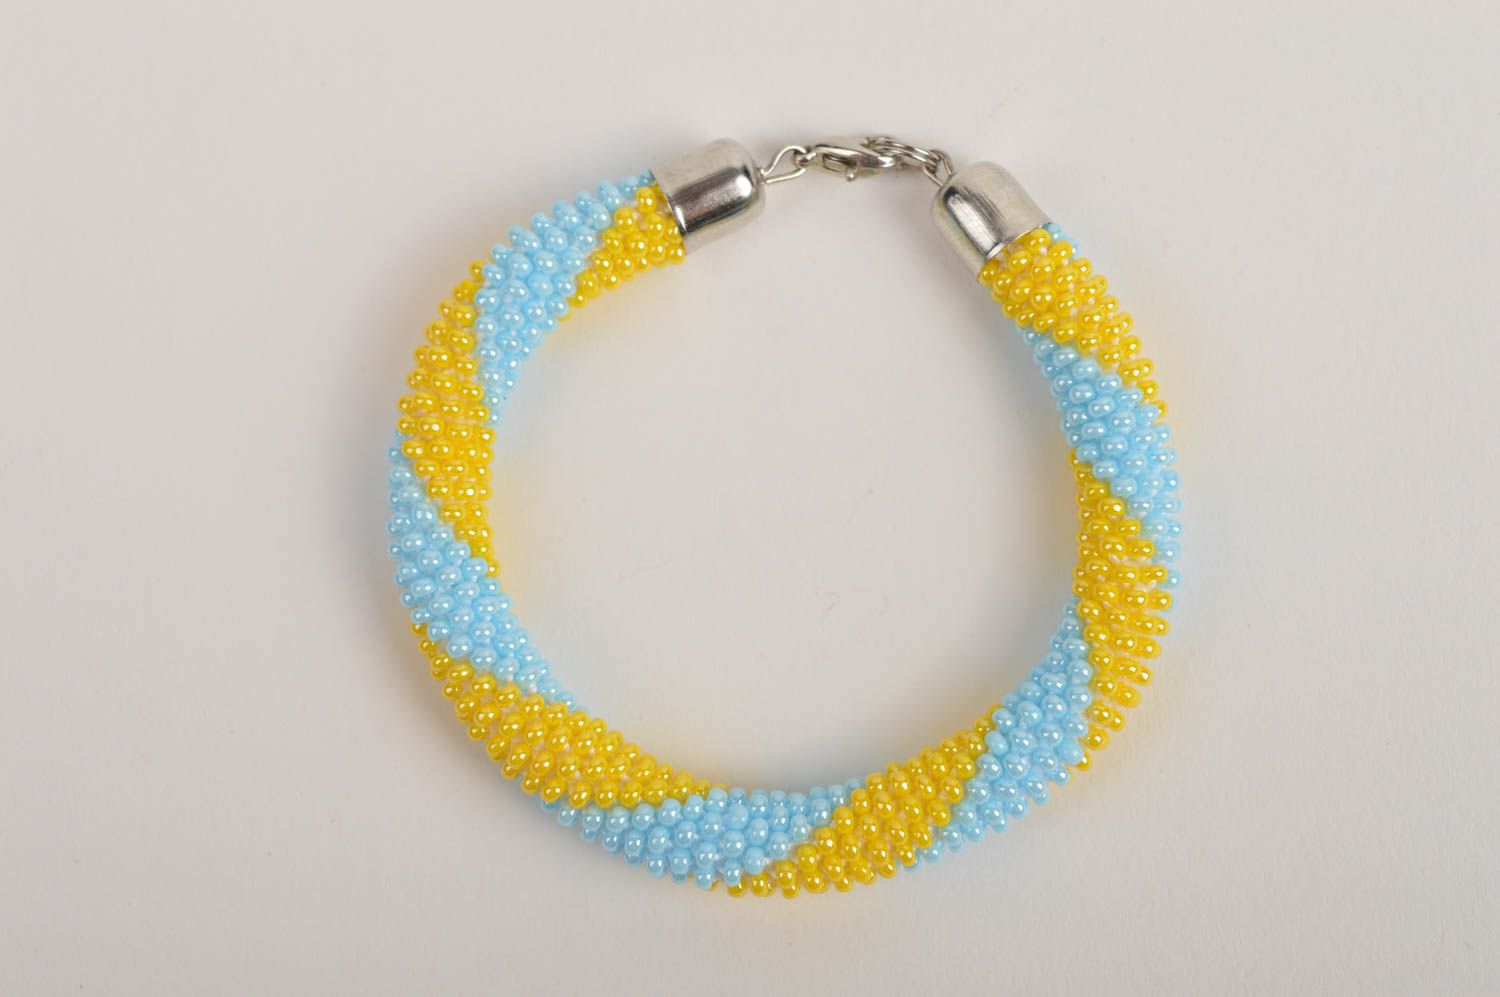 Homemade cord made of Czech beads adjustable bracelet in yellow and blue color photo 3